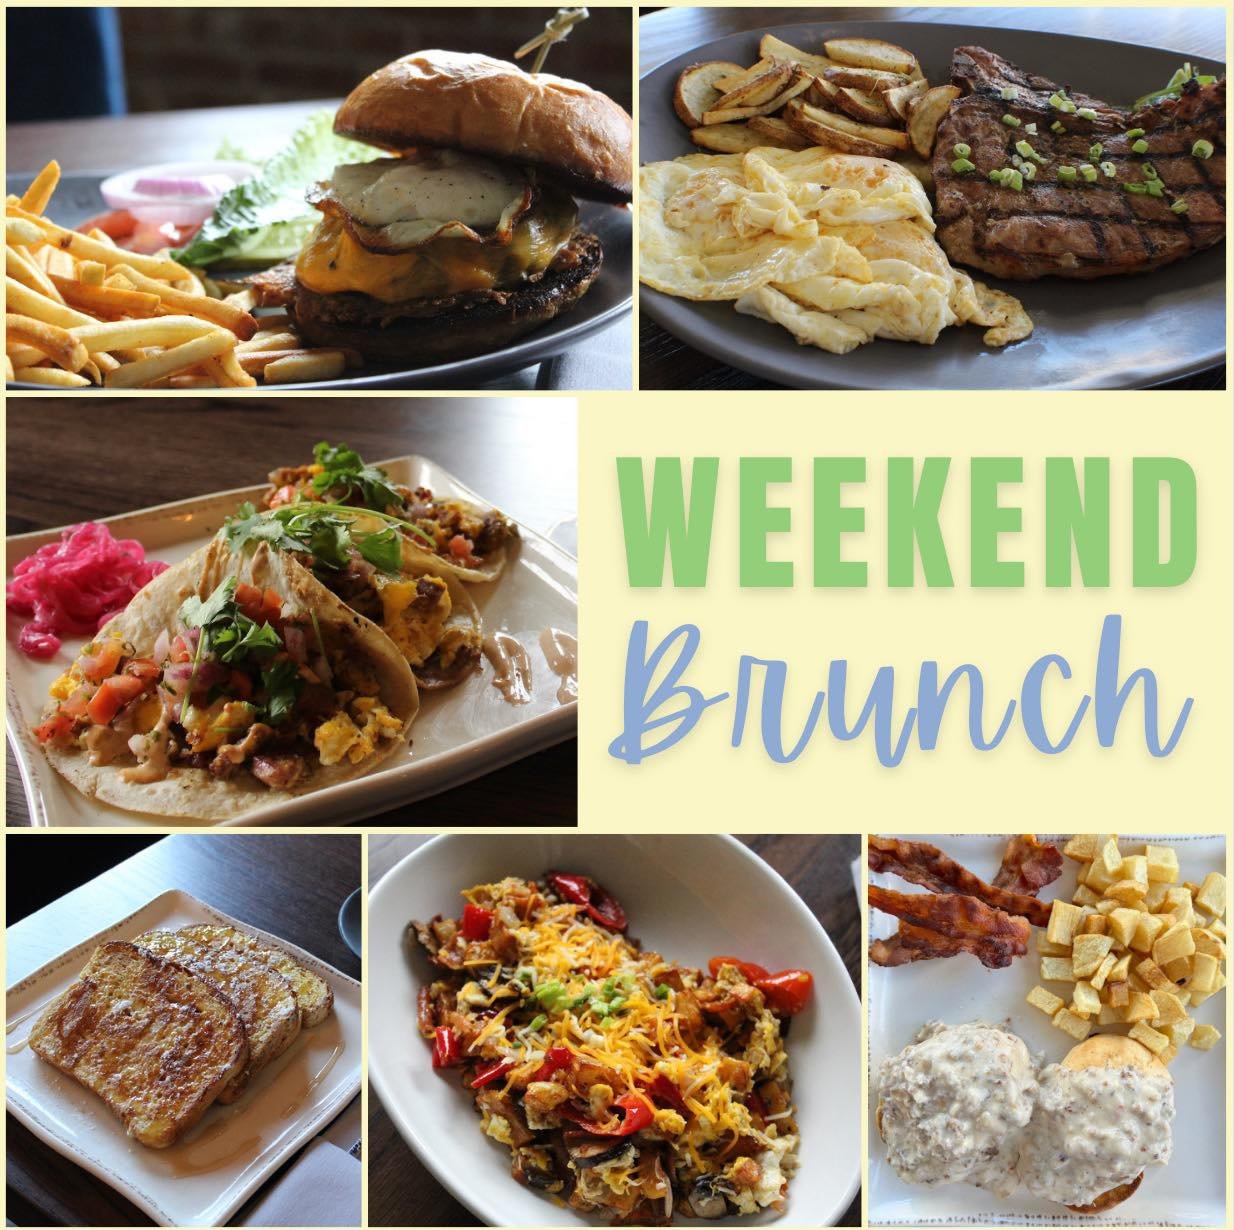 🌟 Join us this weekend at Powerhouse Social for an amazing brunch! Indulge in delicious food and refreshing mimosas that will kickstart your weekend. Don't miss out on the perfect combo of great food and vibes.  See you there! 🍳🥂 #BrunchWeekend #P